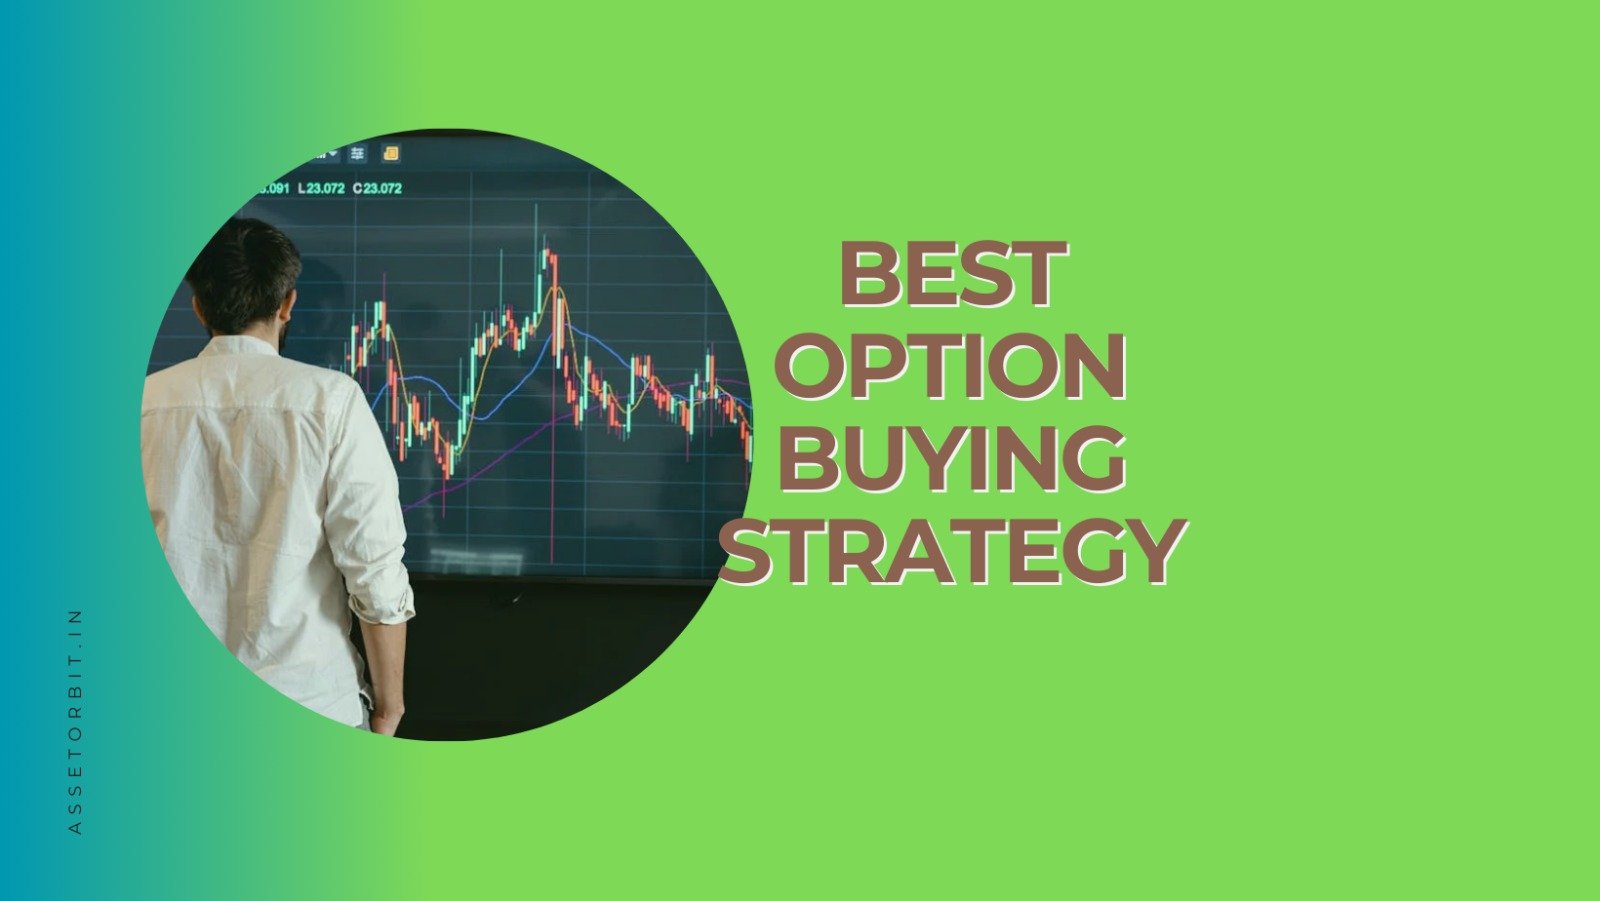 Best Option Buying Strategy for Index Options